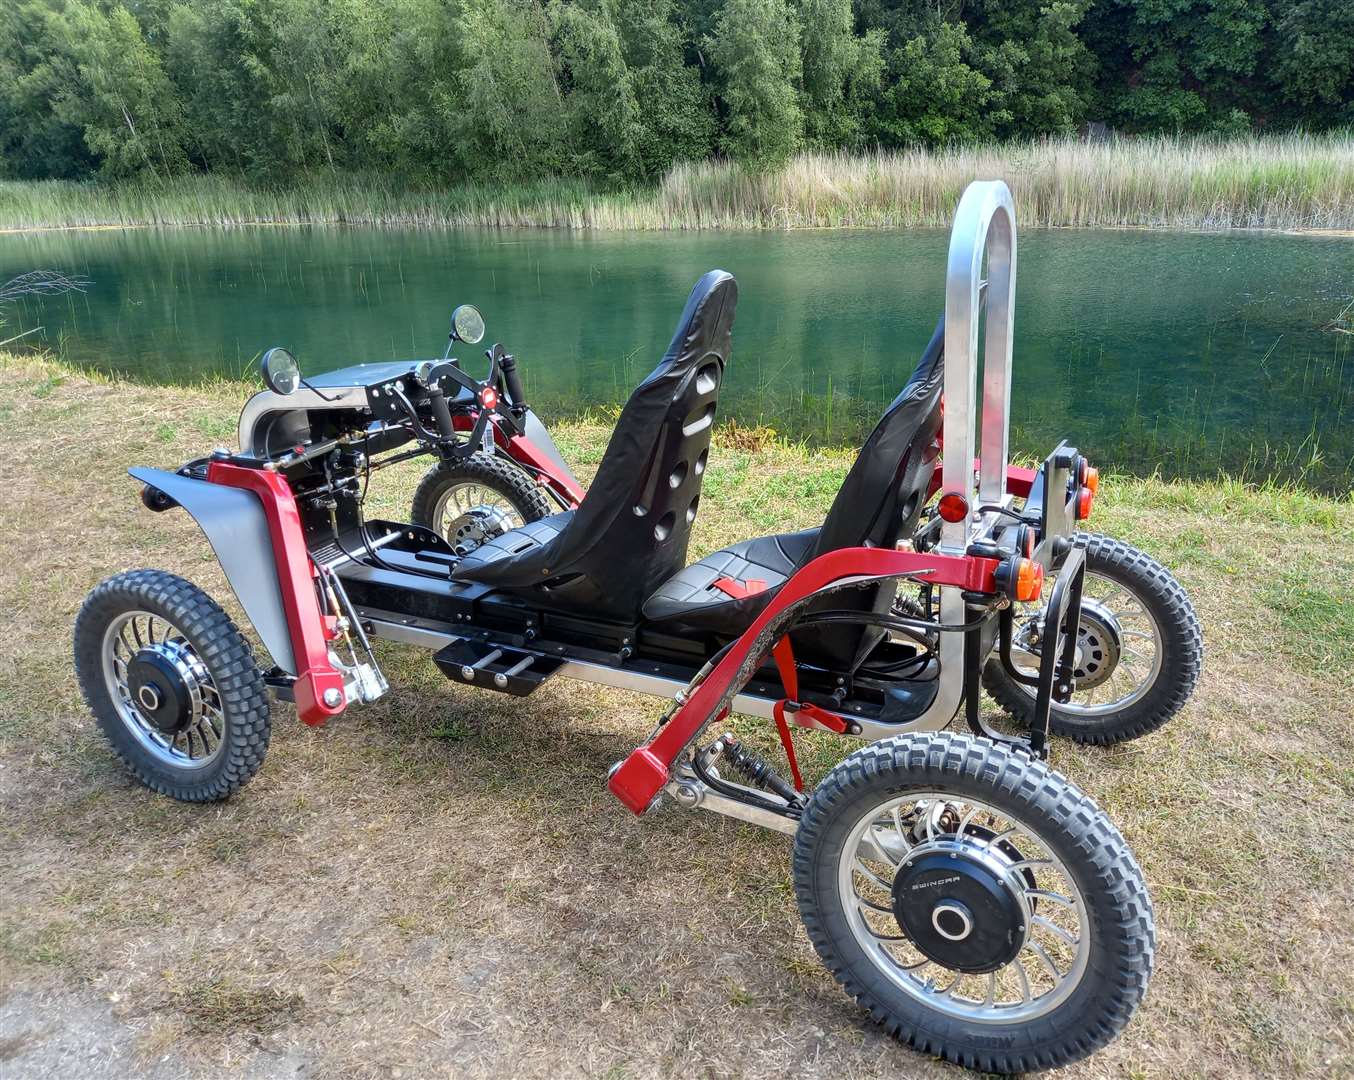 The e-Spider comes in a tandem version so children can ride along too